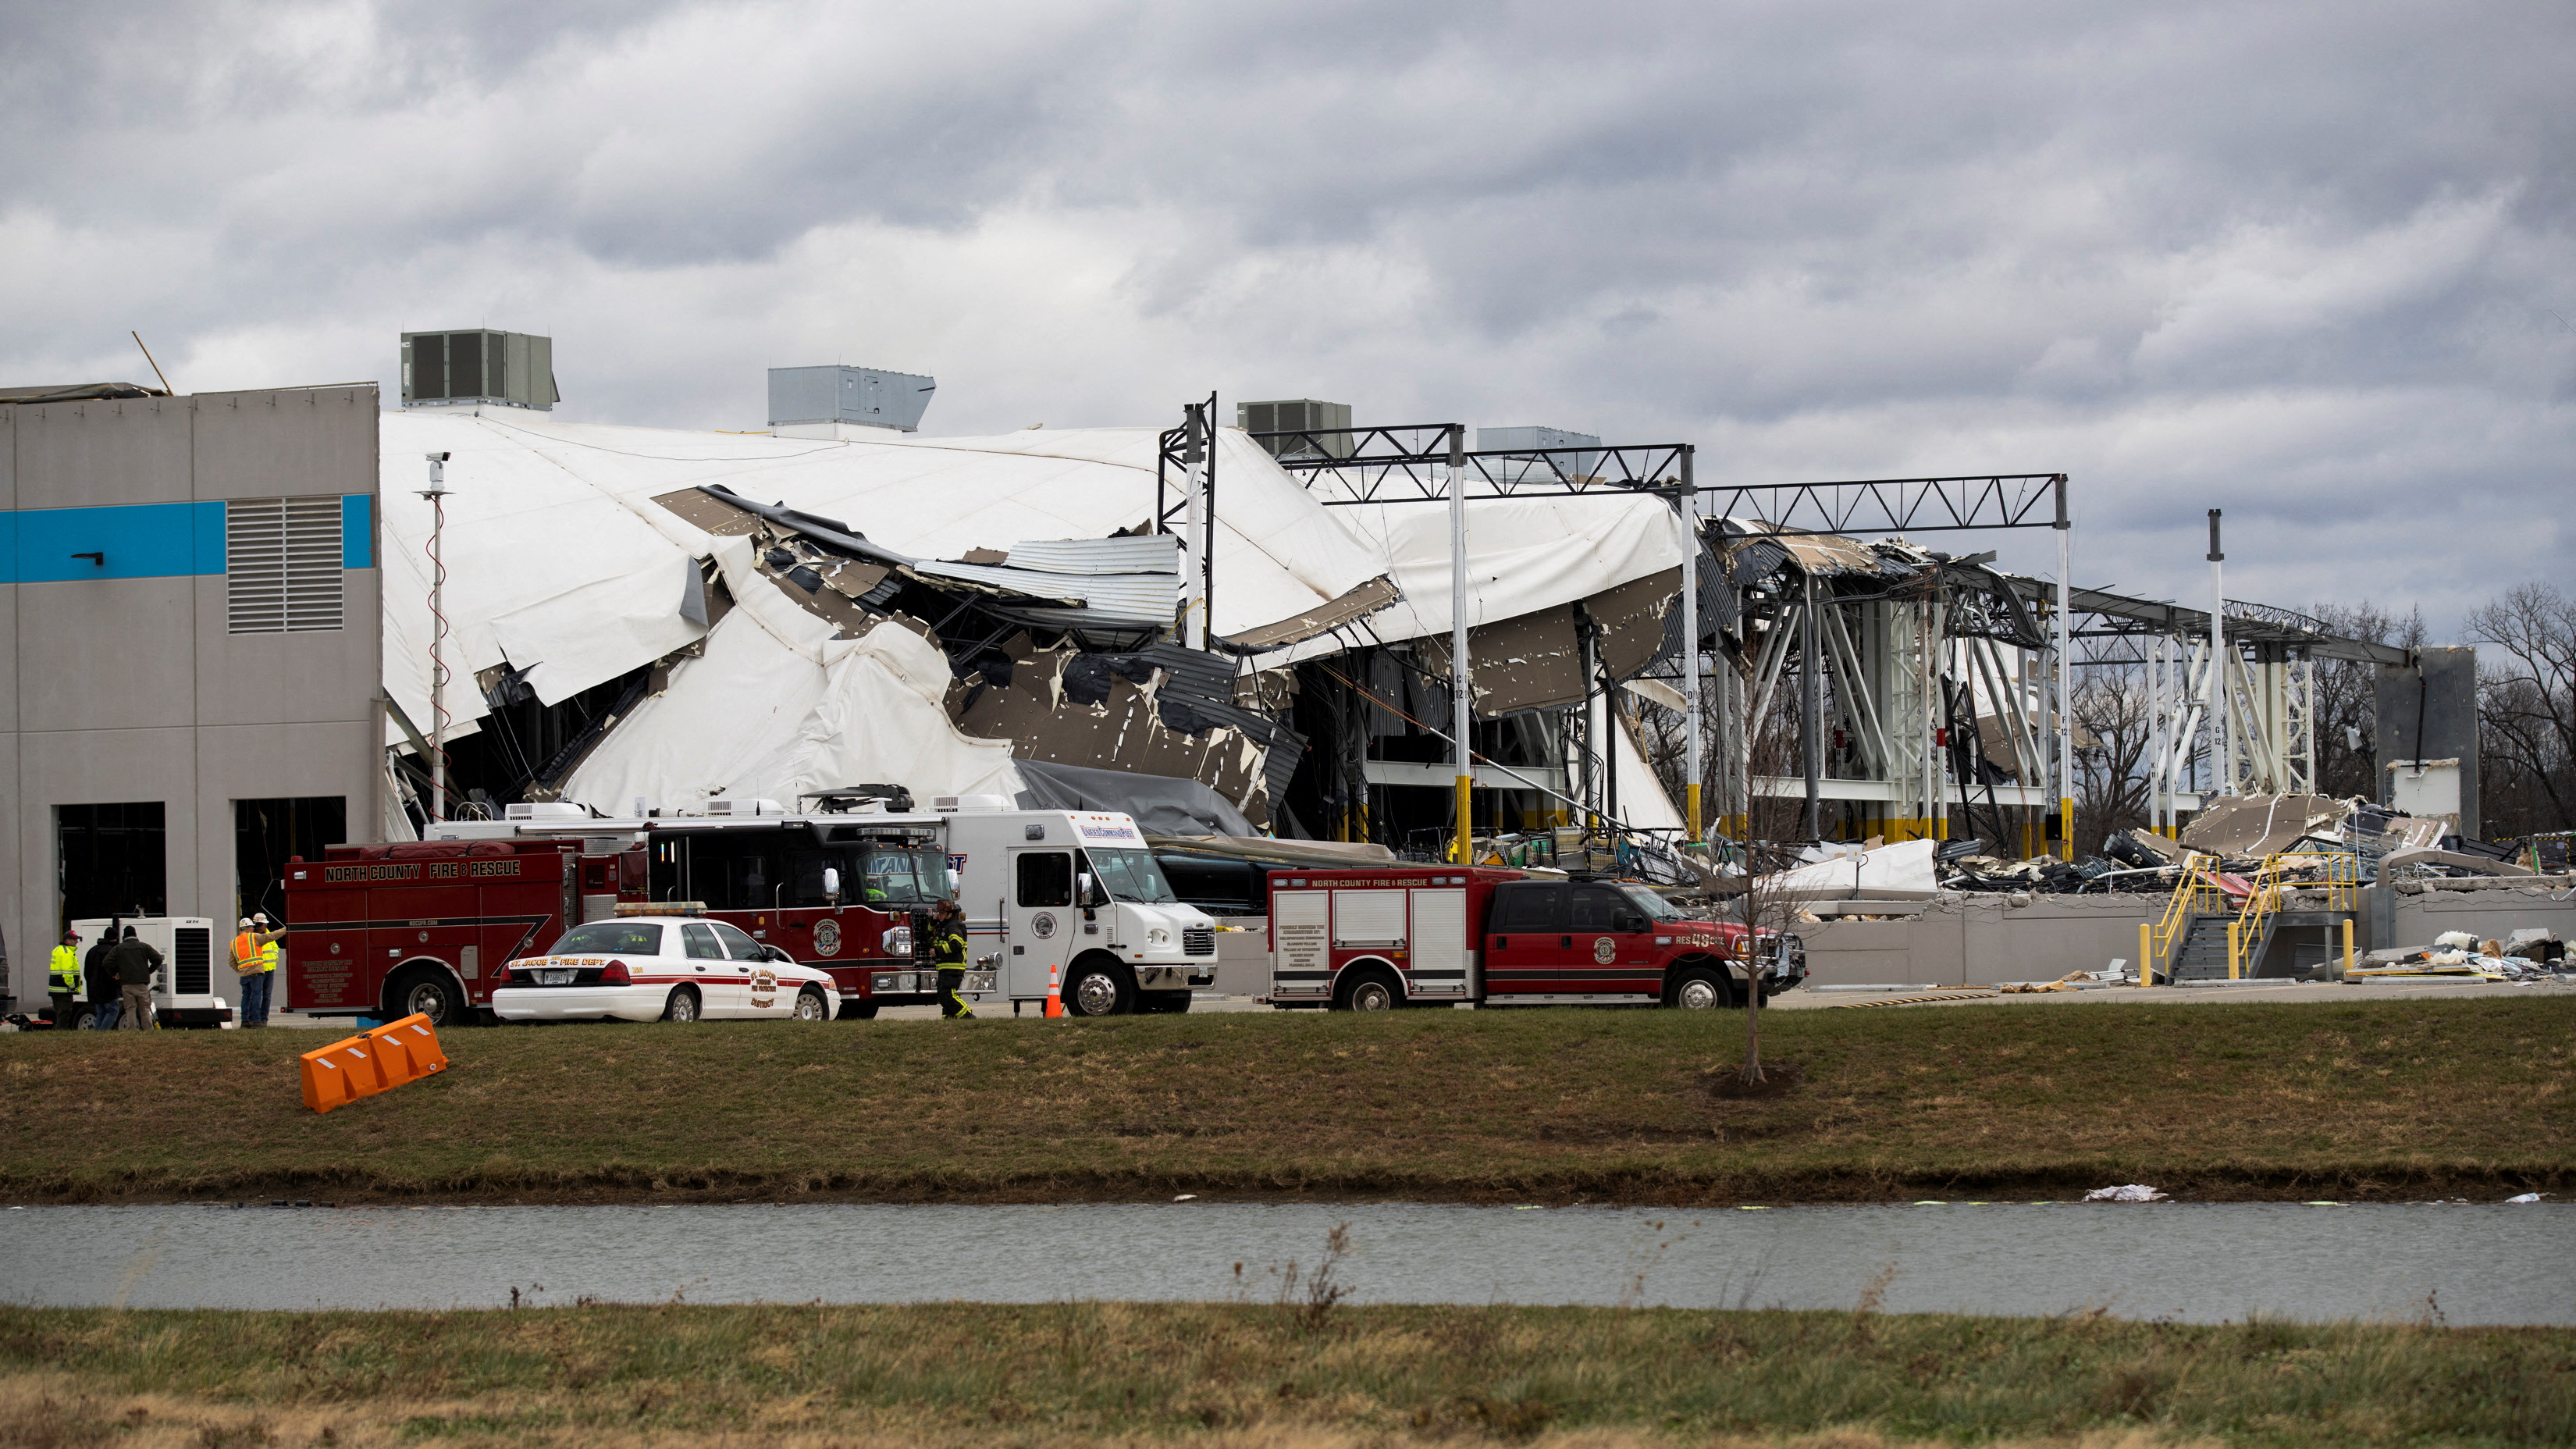 A collapsed roof is seen at an Amazon distribution center after a tornado hits Edwardsville, in Illinois, U.S. December 11, 2021. REUTERS/Lawrence Bryant